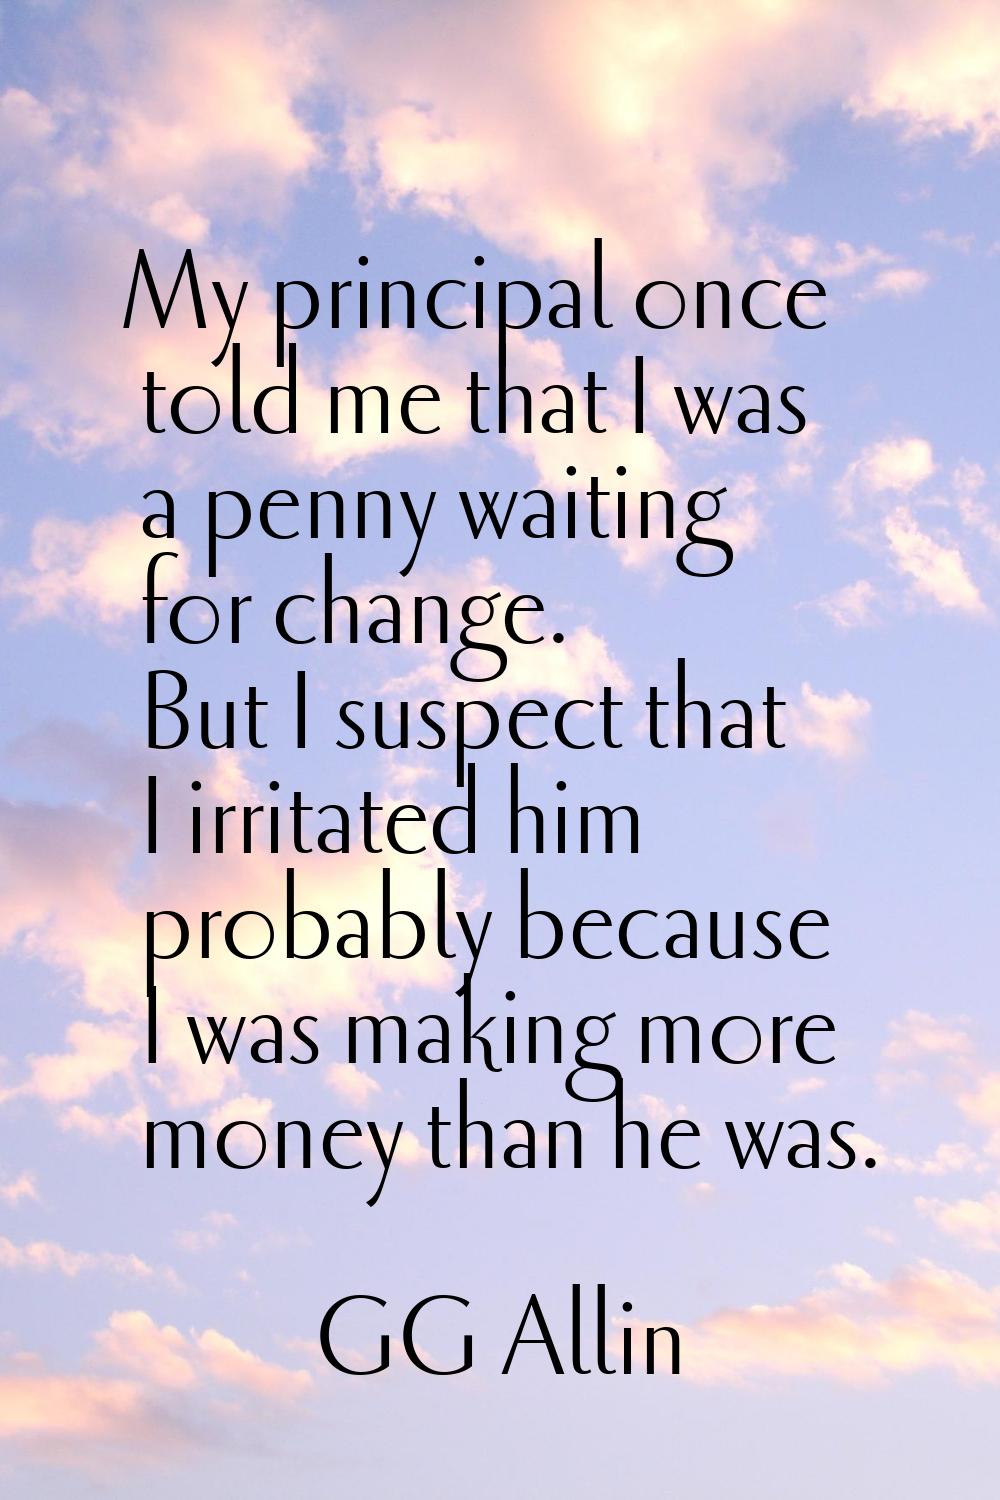 My principal once told me that I was a penny waiting for change. But I suspect that I irritated him